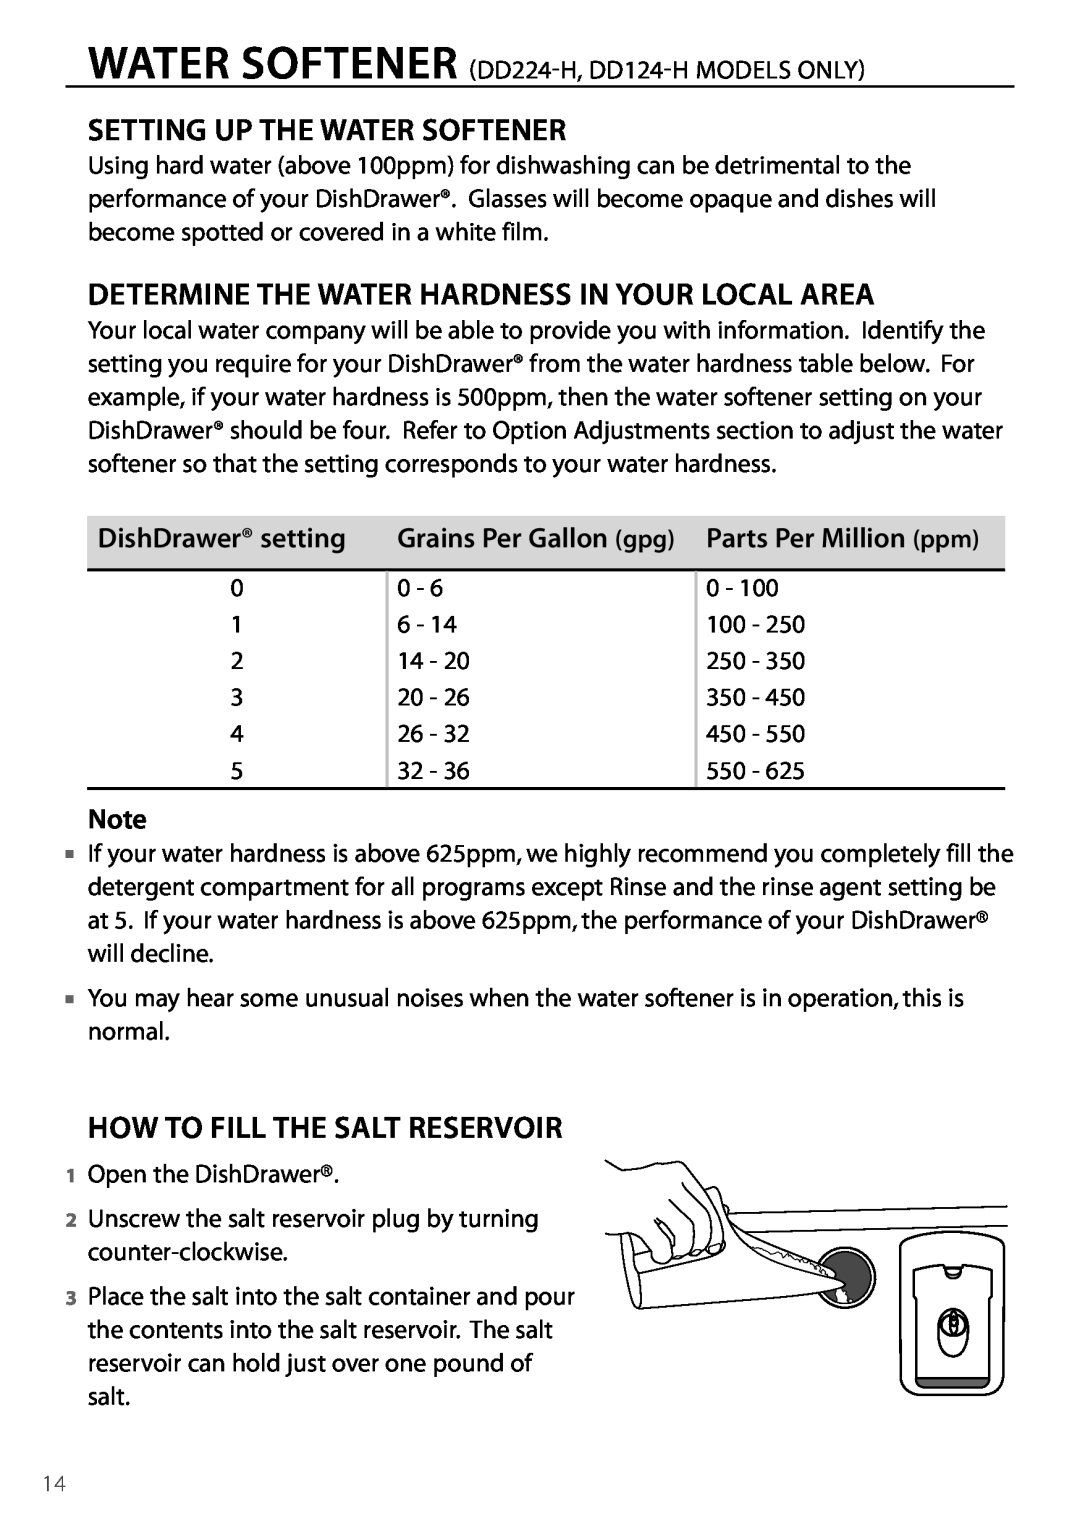 DCS DD224 Setting Up The Water Softener, Determine The Water Hardness In Your Local Area, How To Fill The Salt Reservoir 